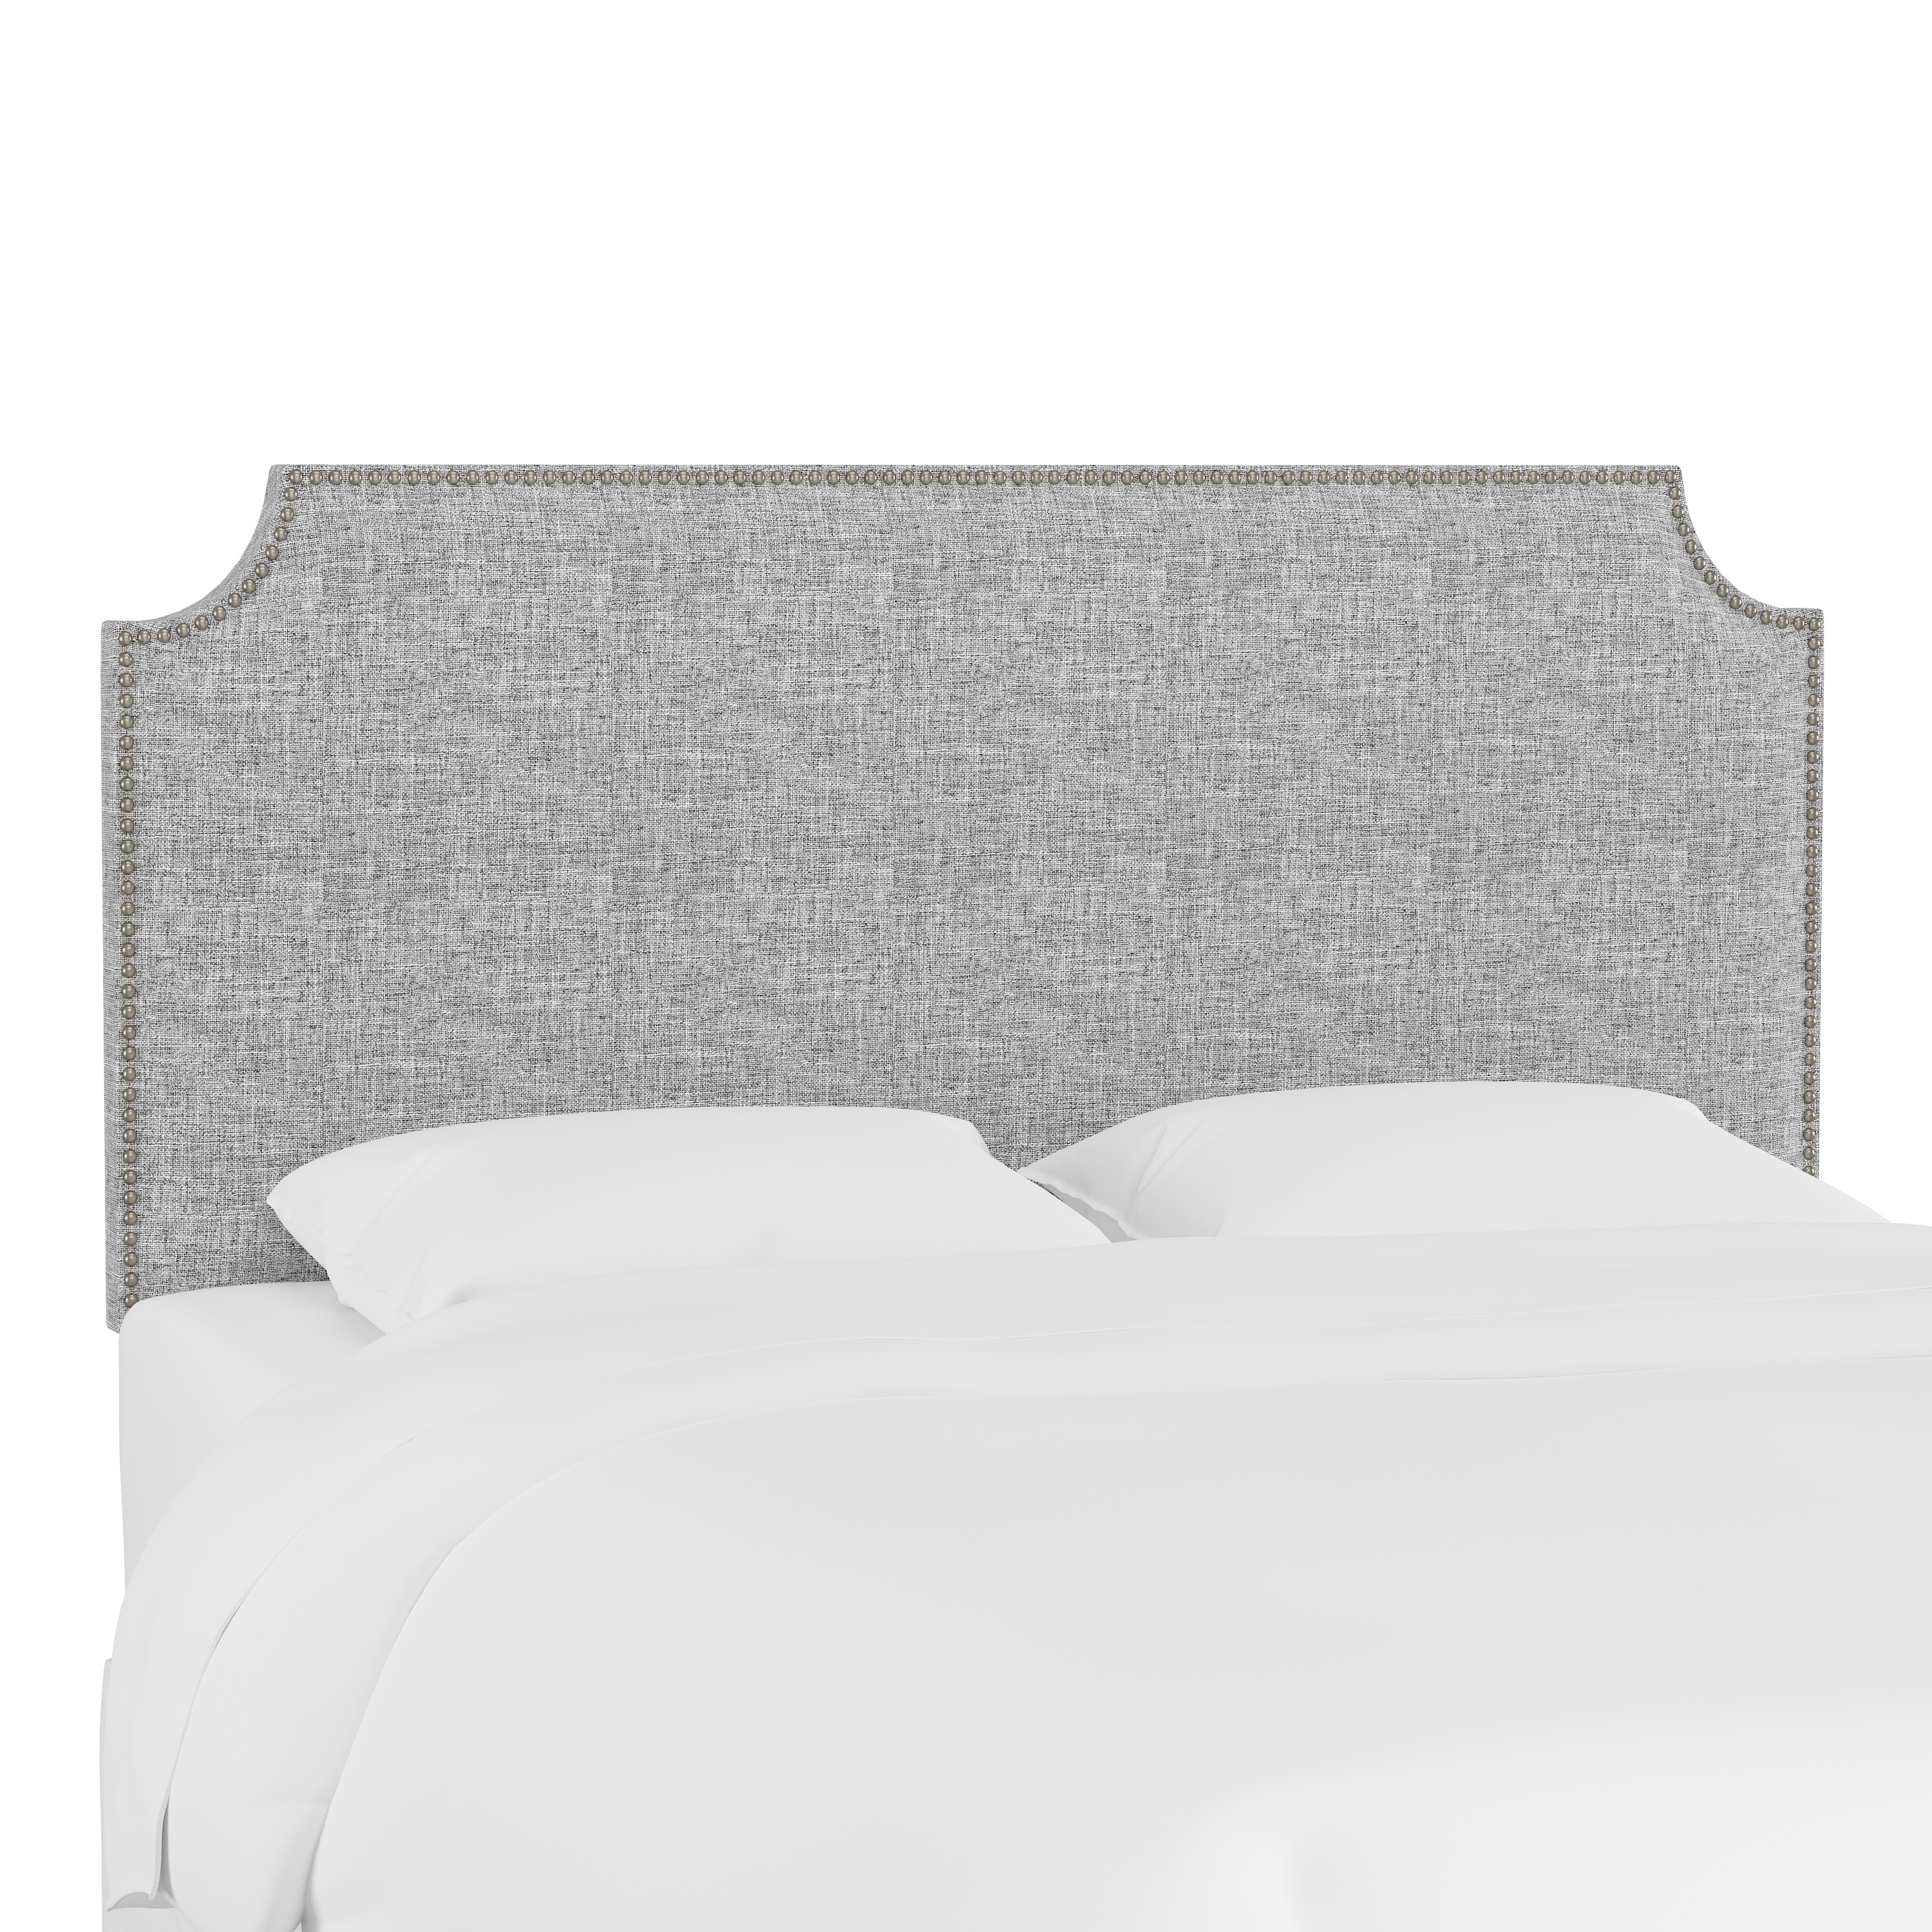 Queen Madison Headboard, Pewter Nailheads - Image 0